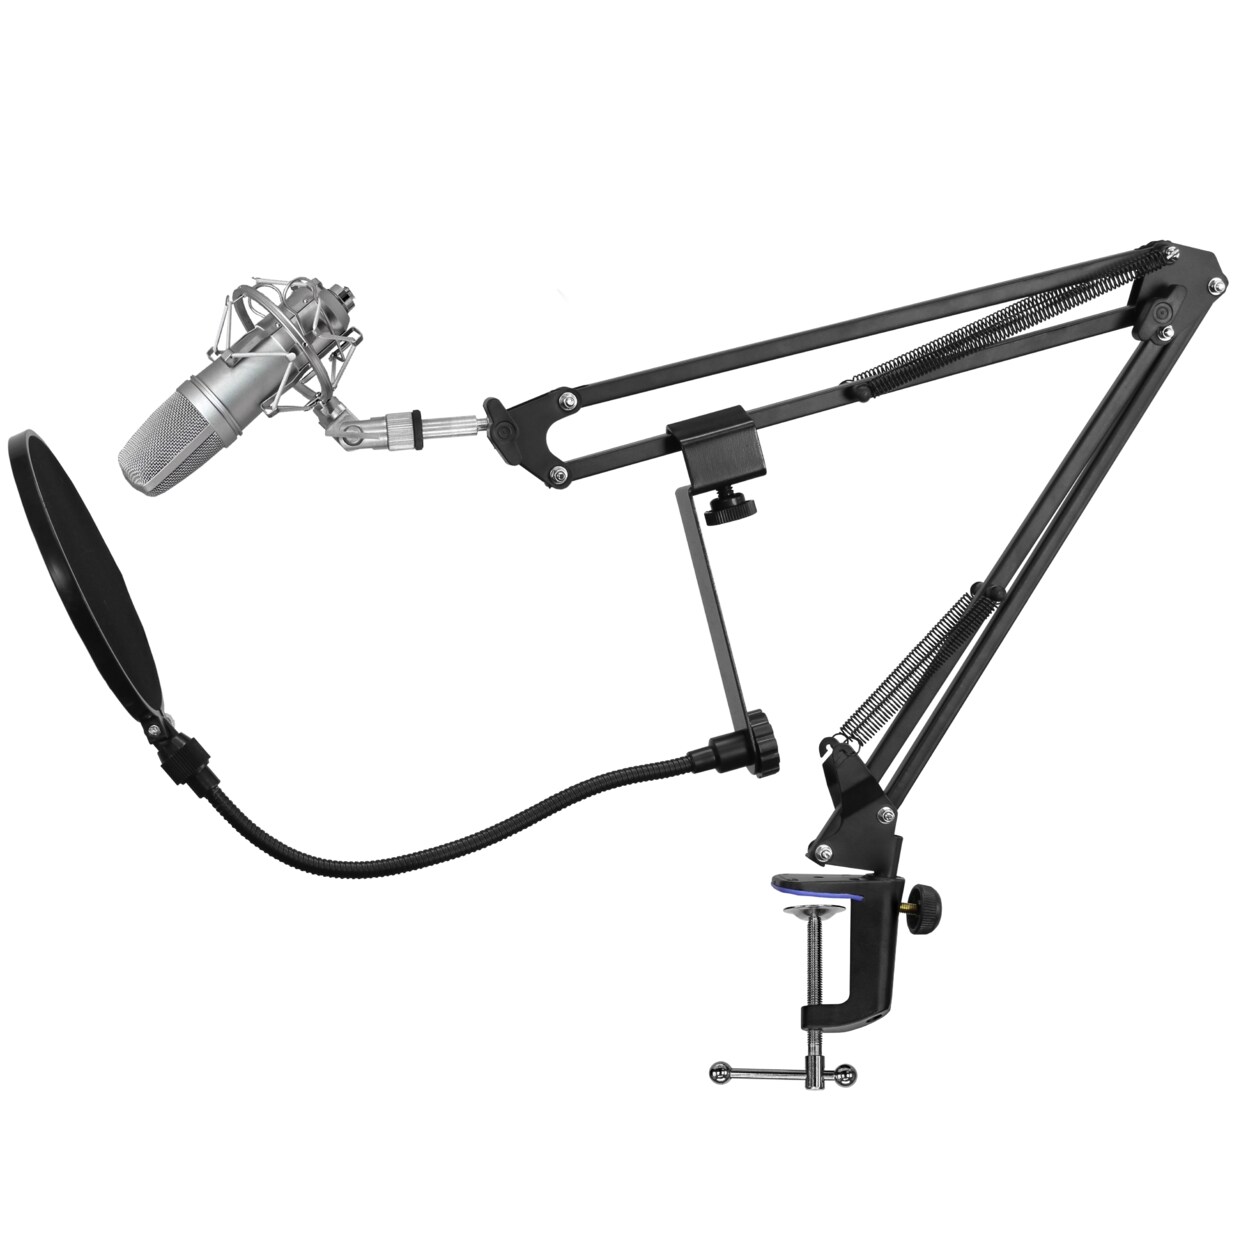 Technical Pro   Professional USB Condenser Microphone Kit w/ Adjustable Scissor Arm Stand Starter Package for Recording